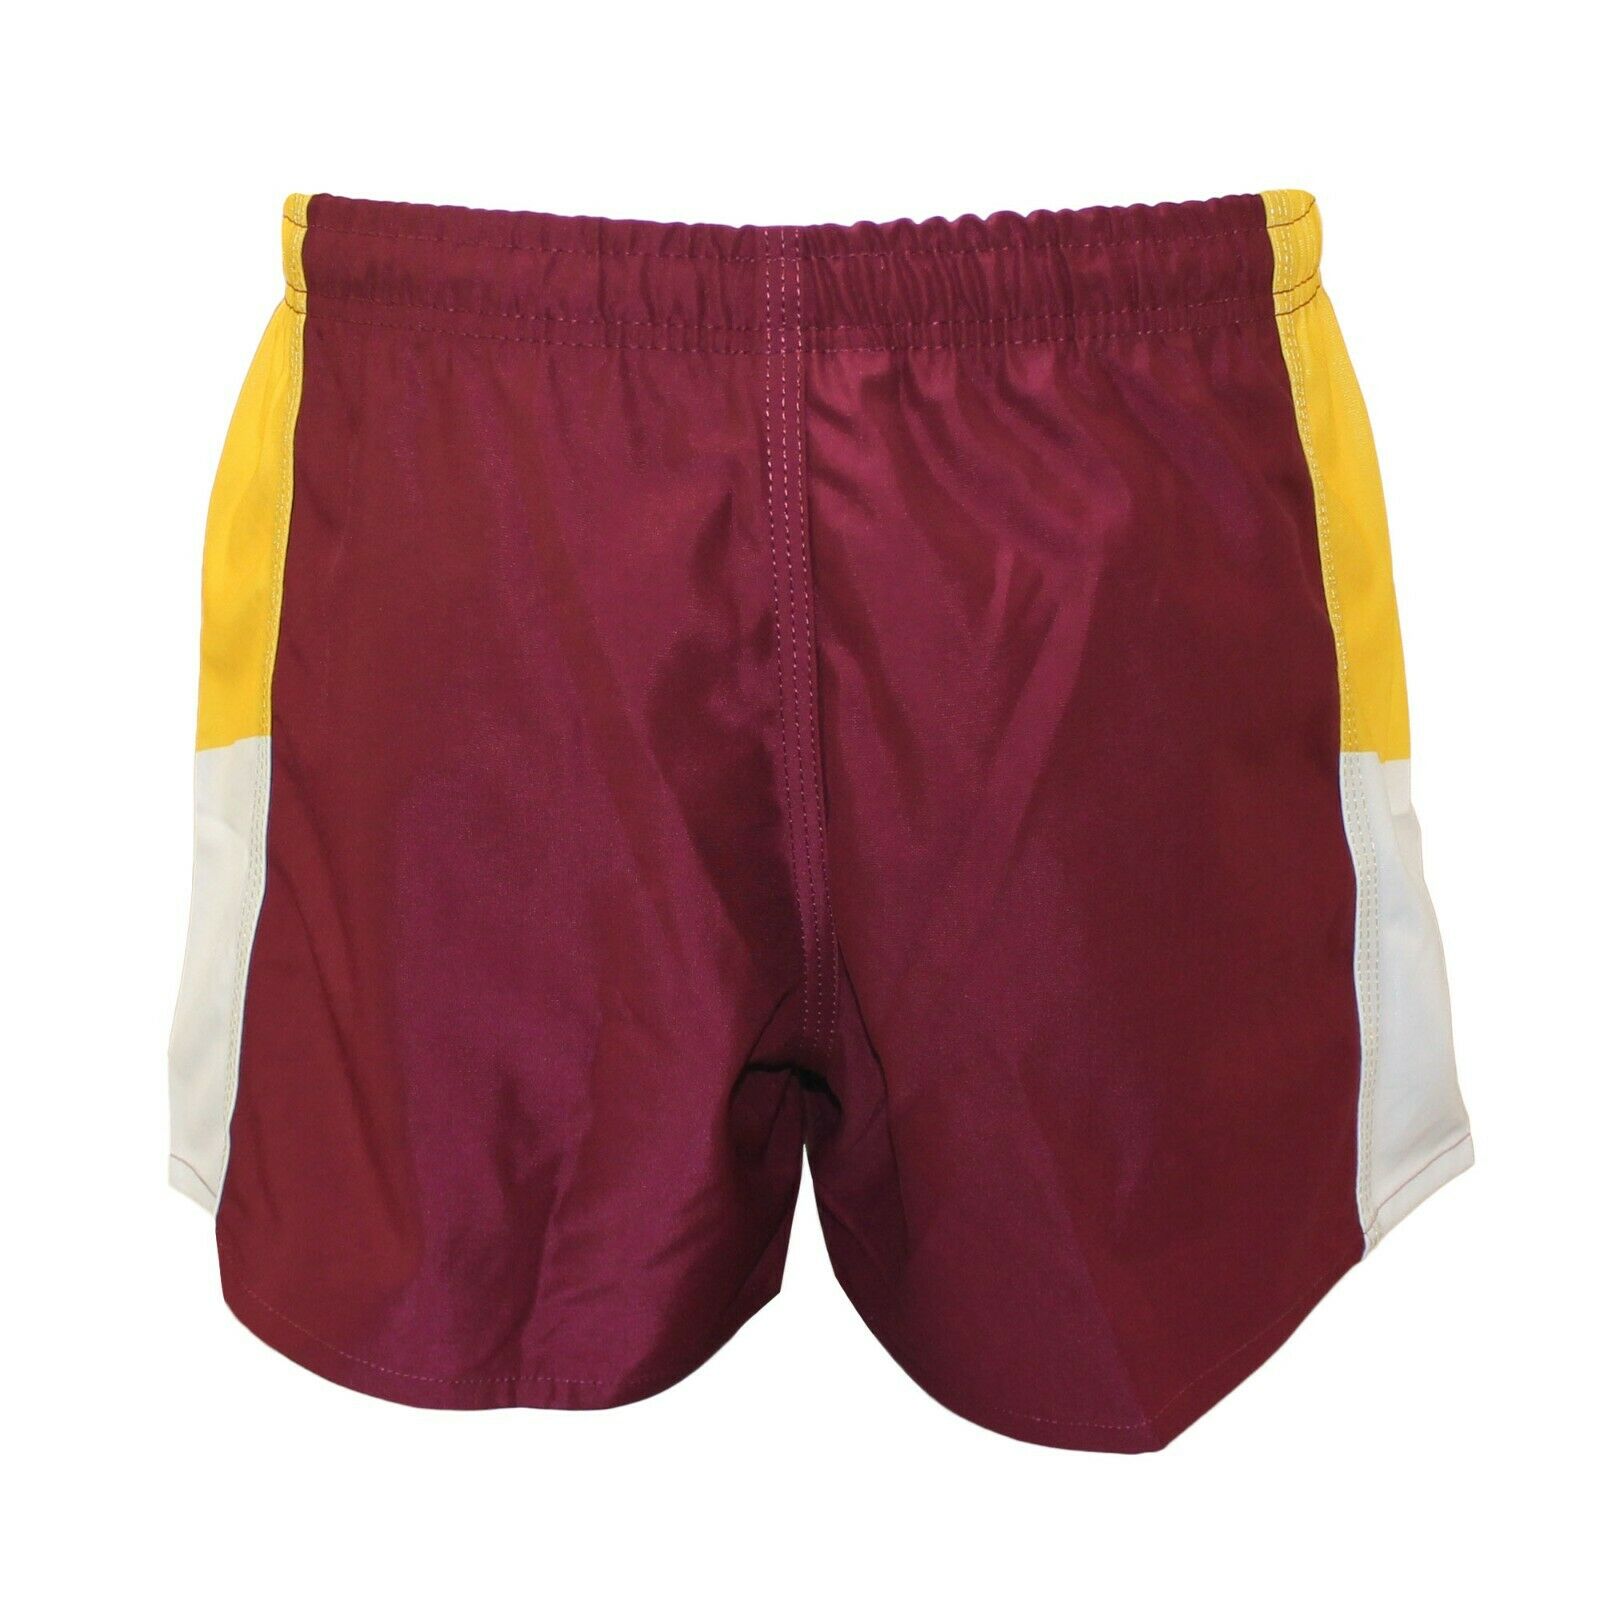 Details about   Brisbane Broncos 2021 NRL Retro Home Supporters Shorts Sizes S-5XL!